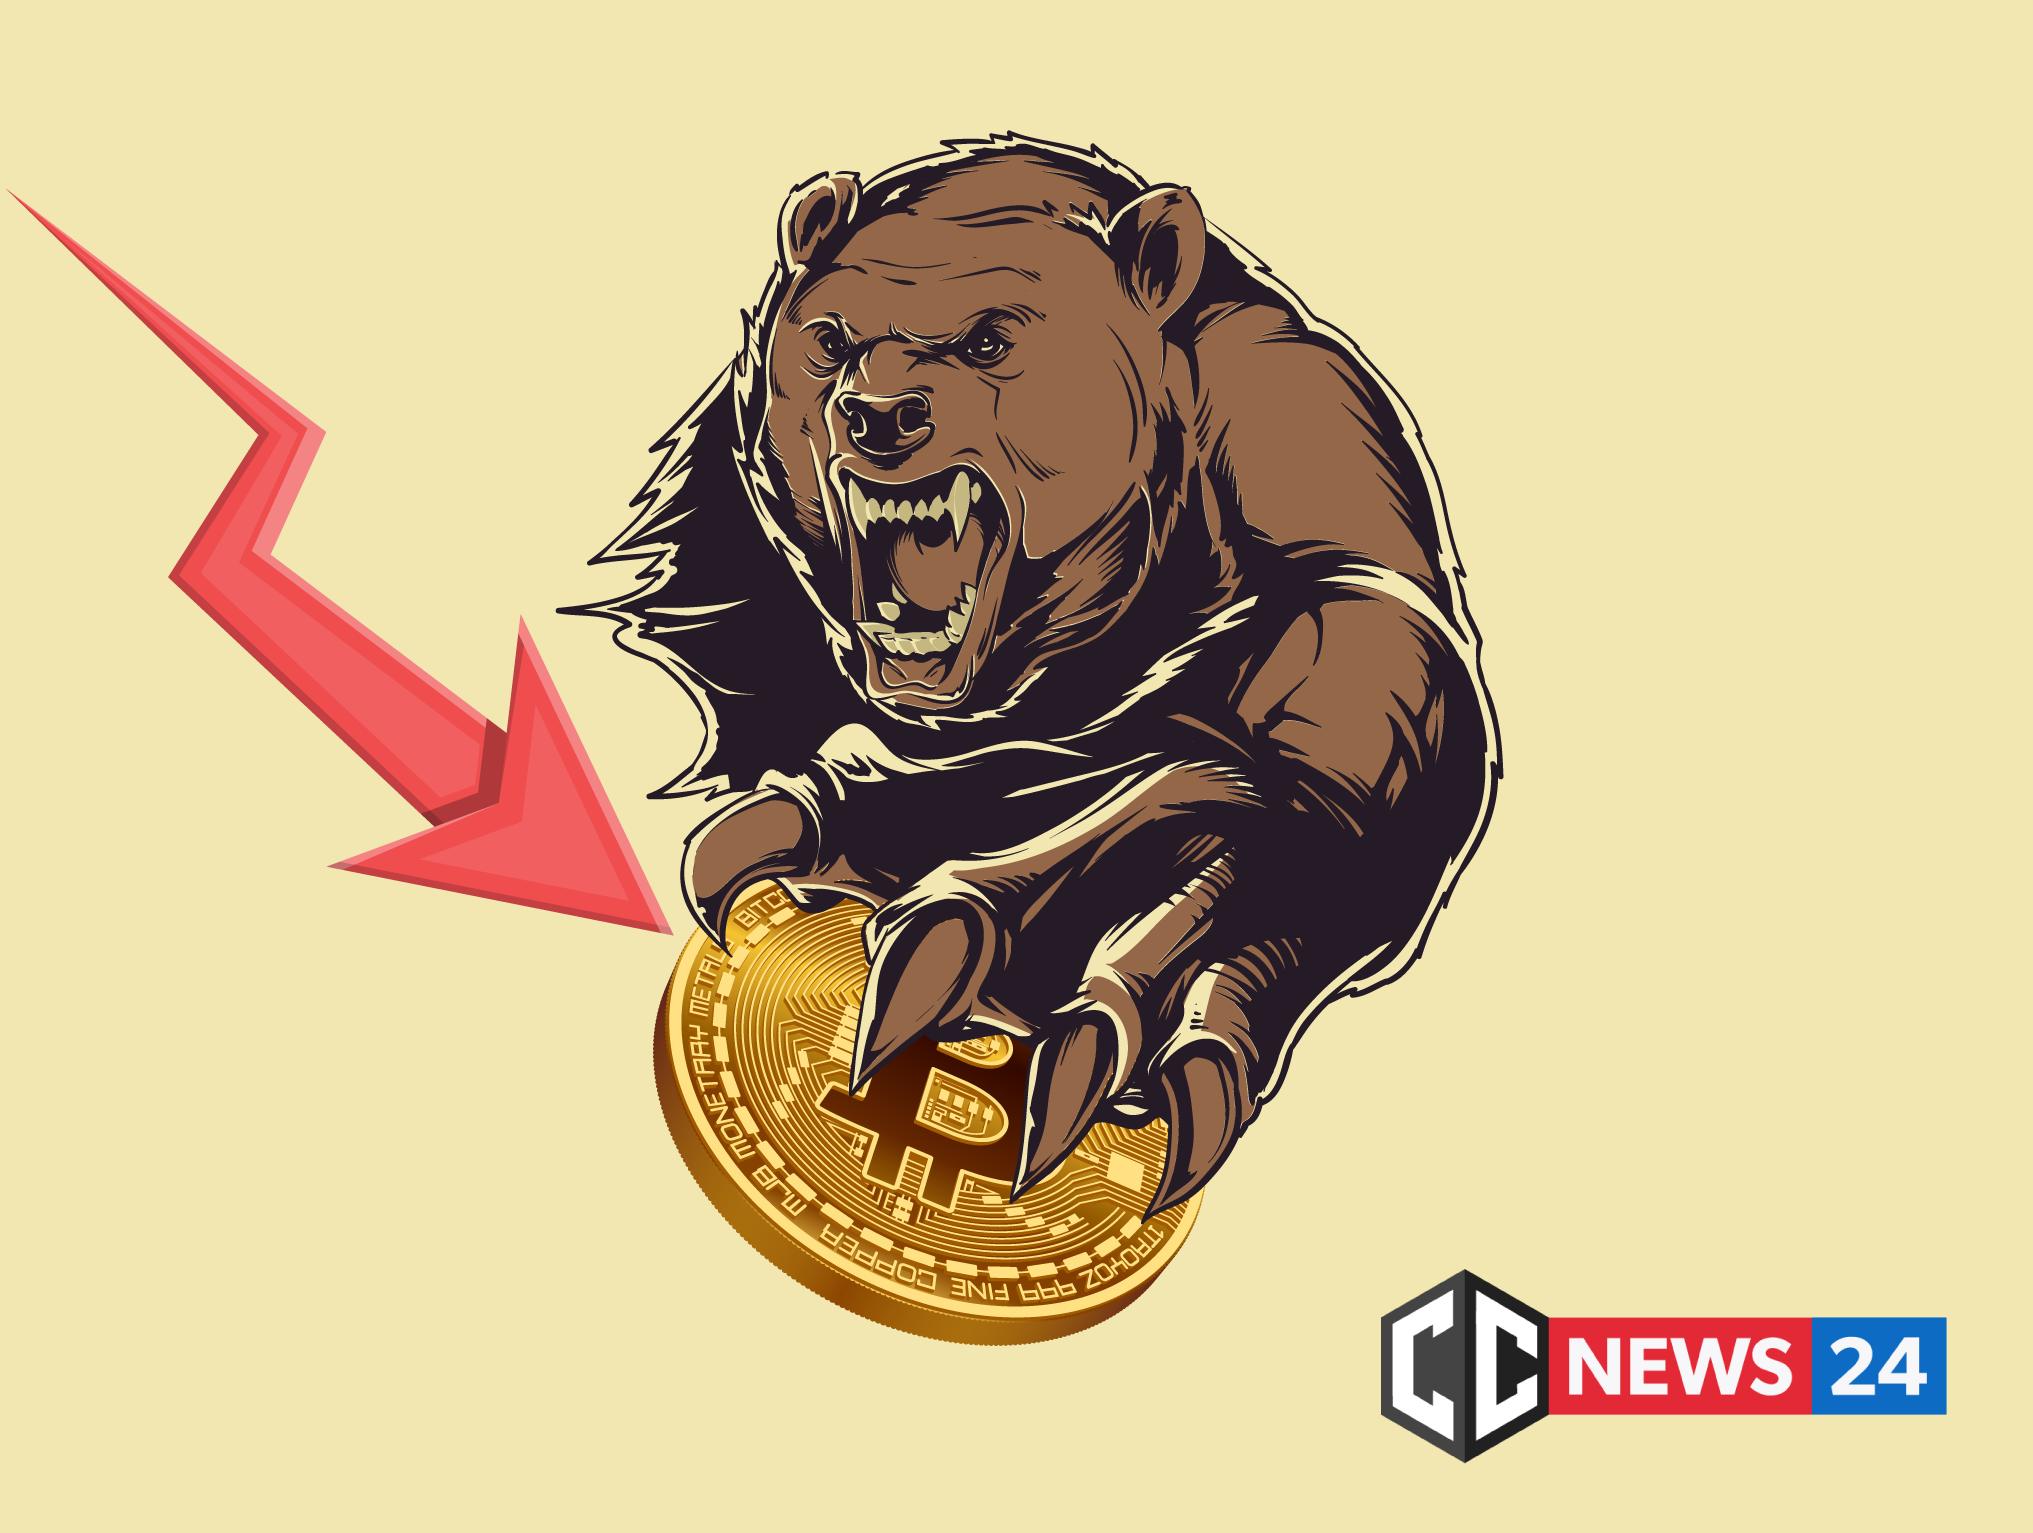 Bears are stronger and we haven't passed $ 7,000 on BTC